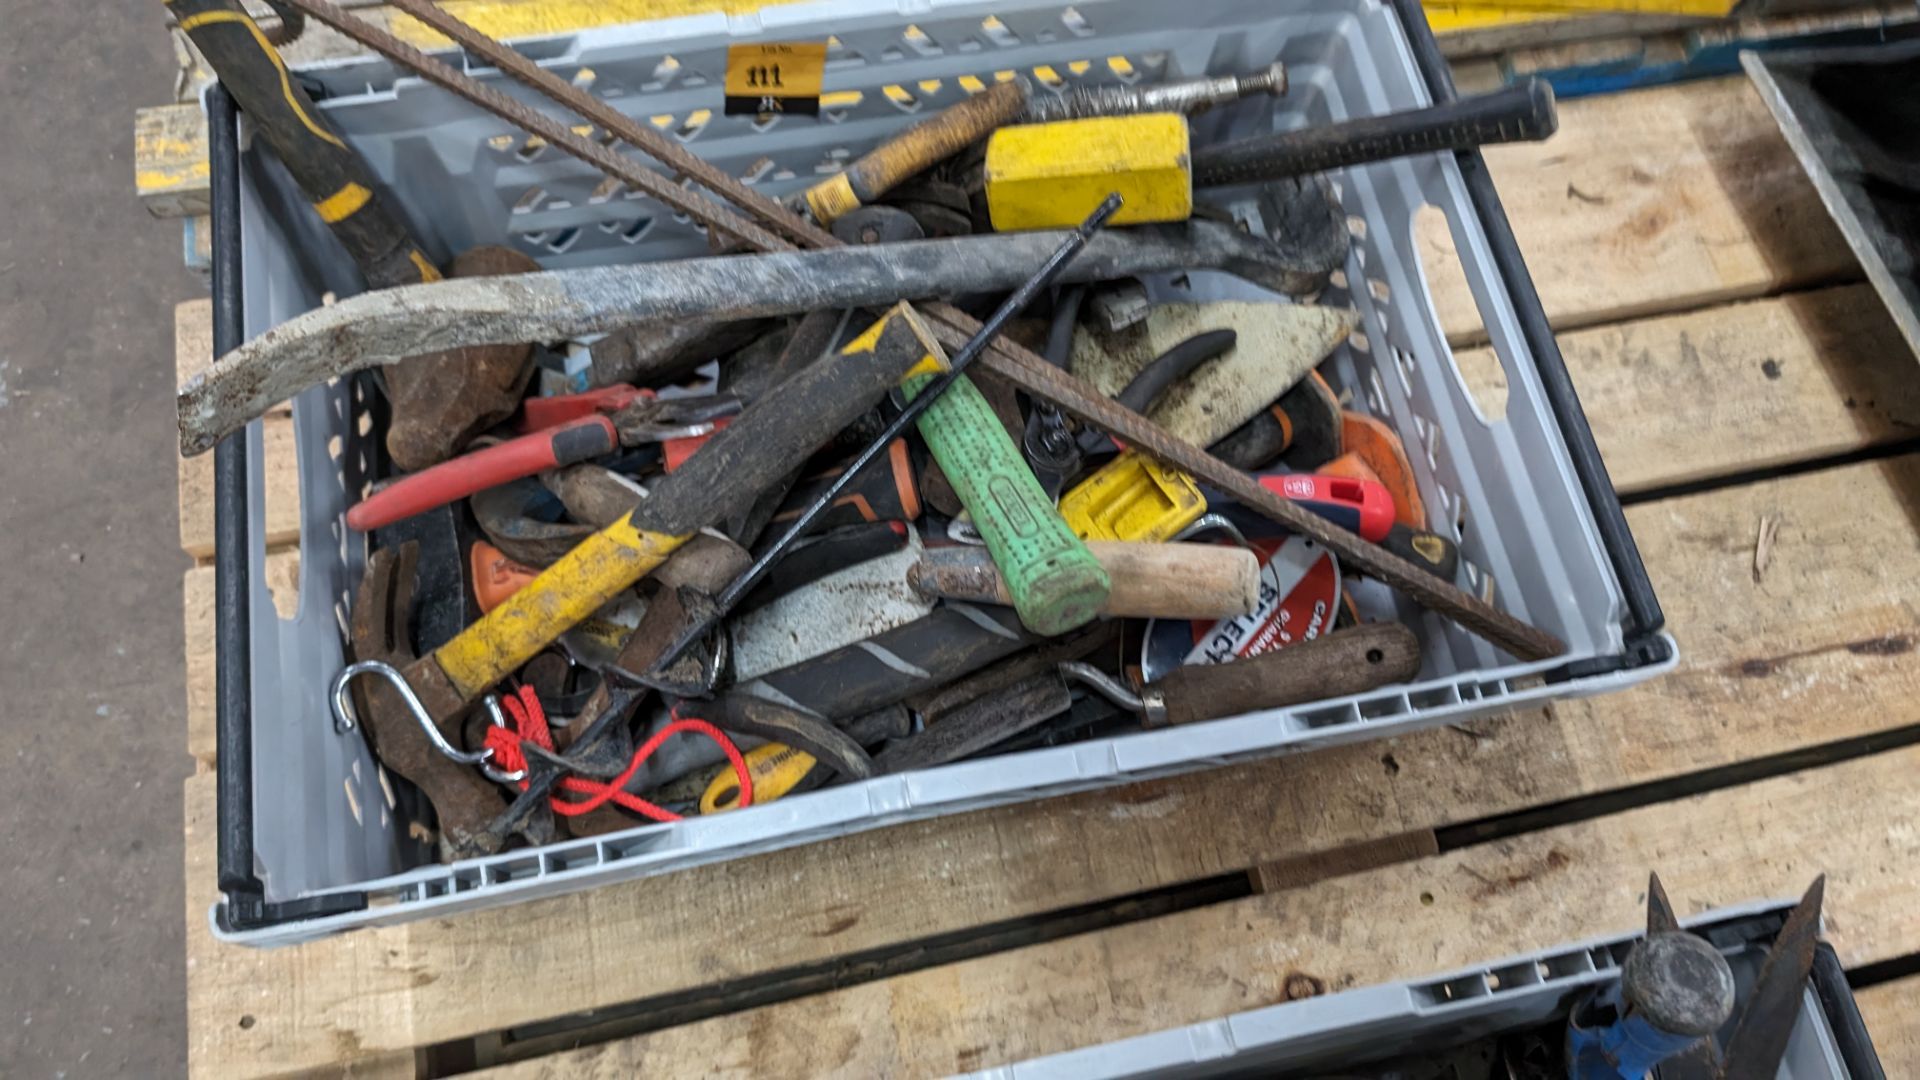 The contents of a crate of hand tools & miscellaneous